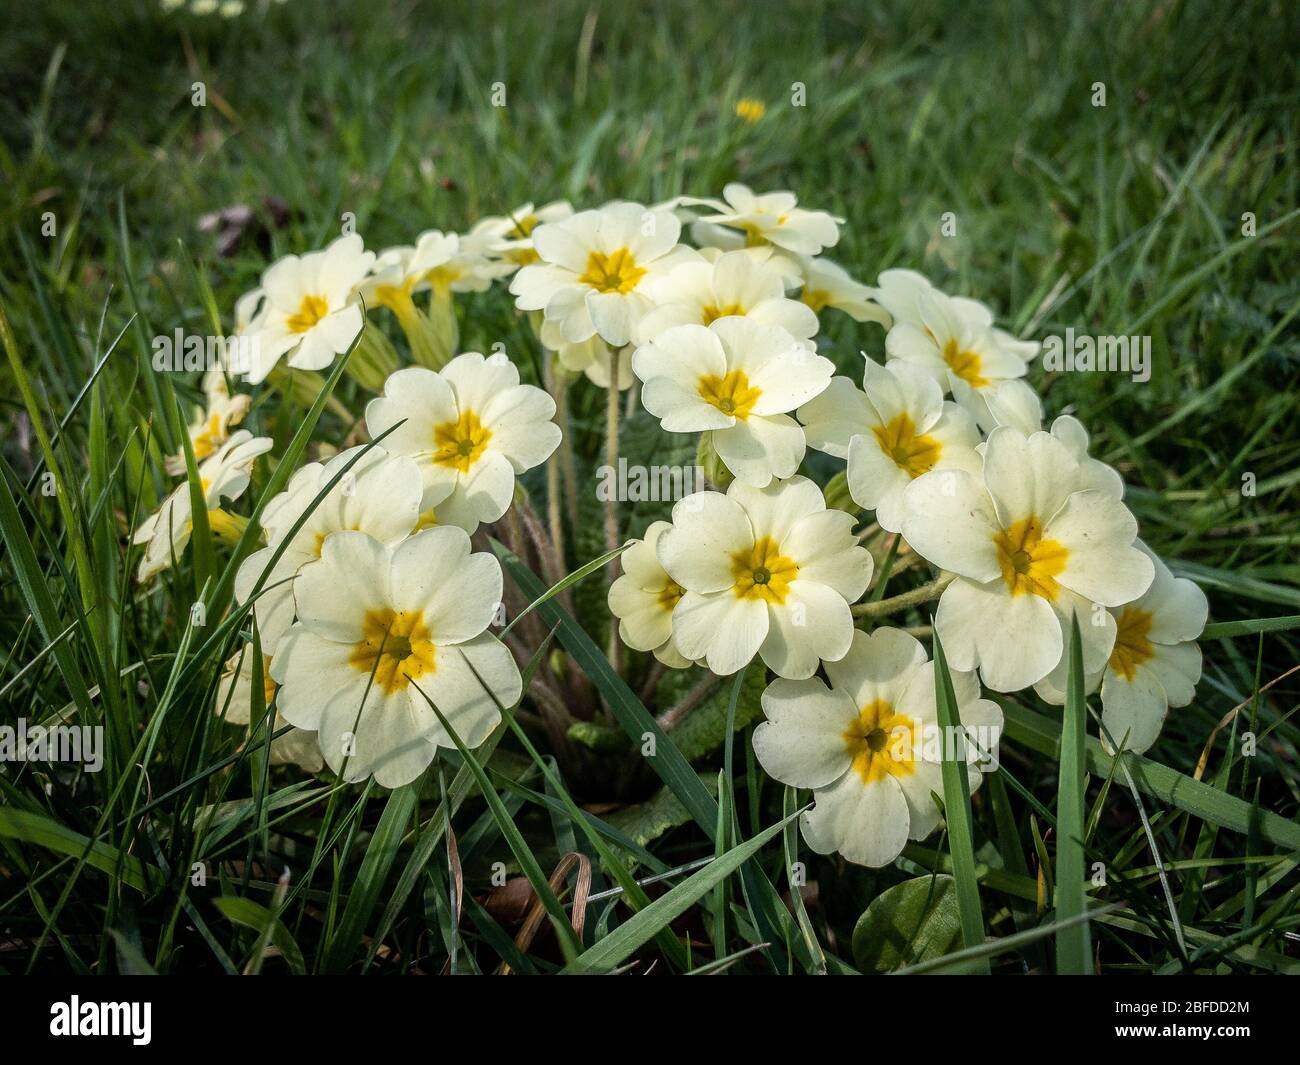 A small but beautiful collection of Primrose flowers in tall, long grass. Stock Photo